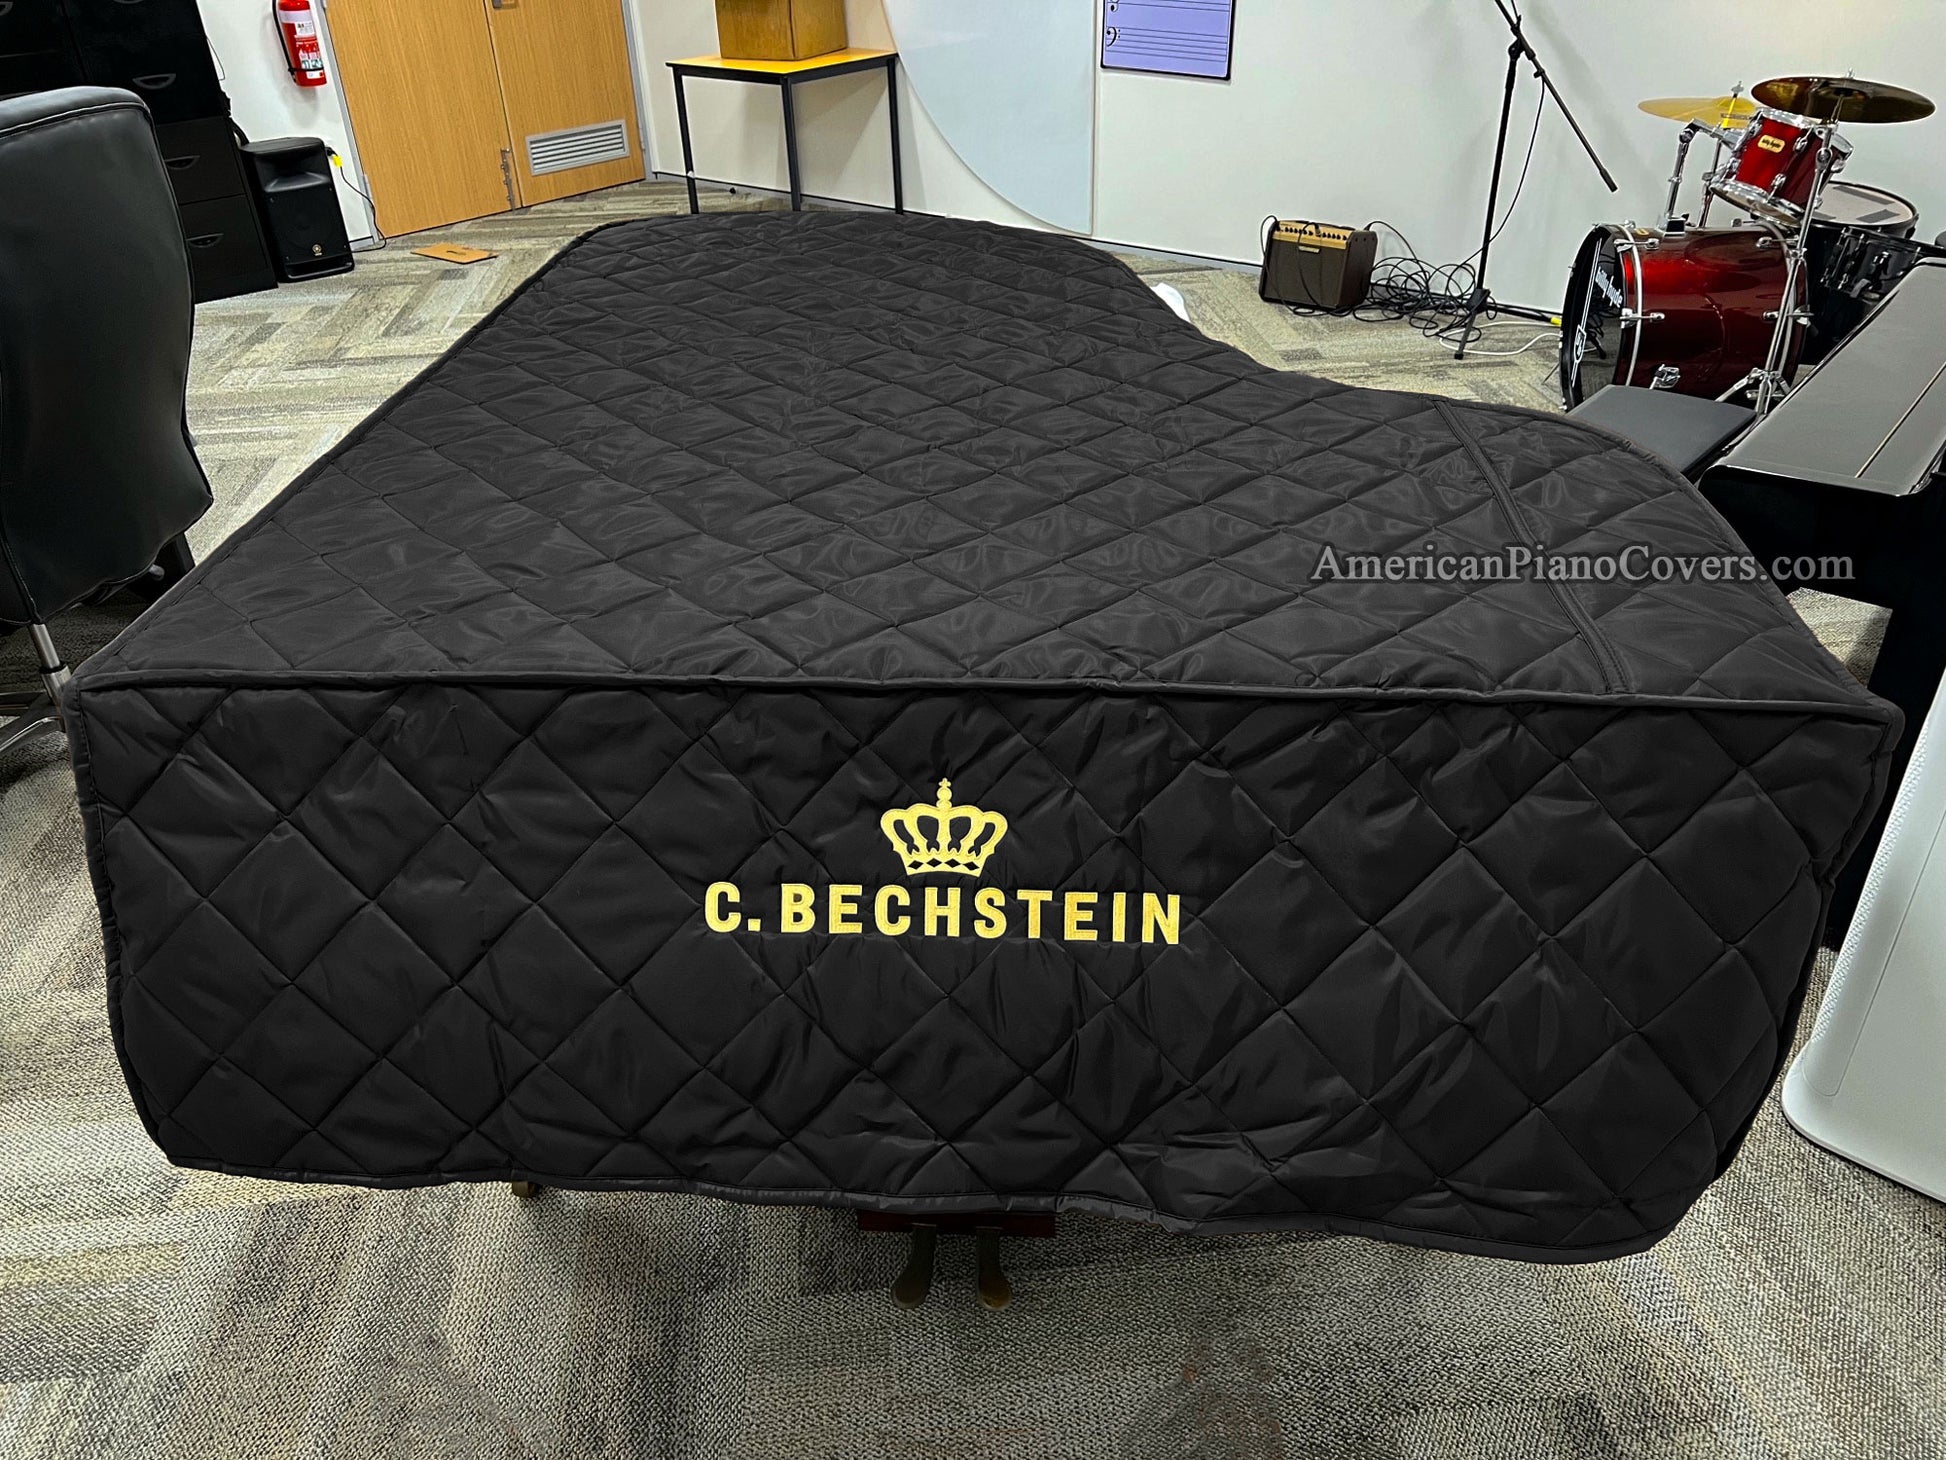 Bechstein piano cover black quilt with logo